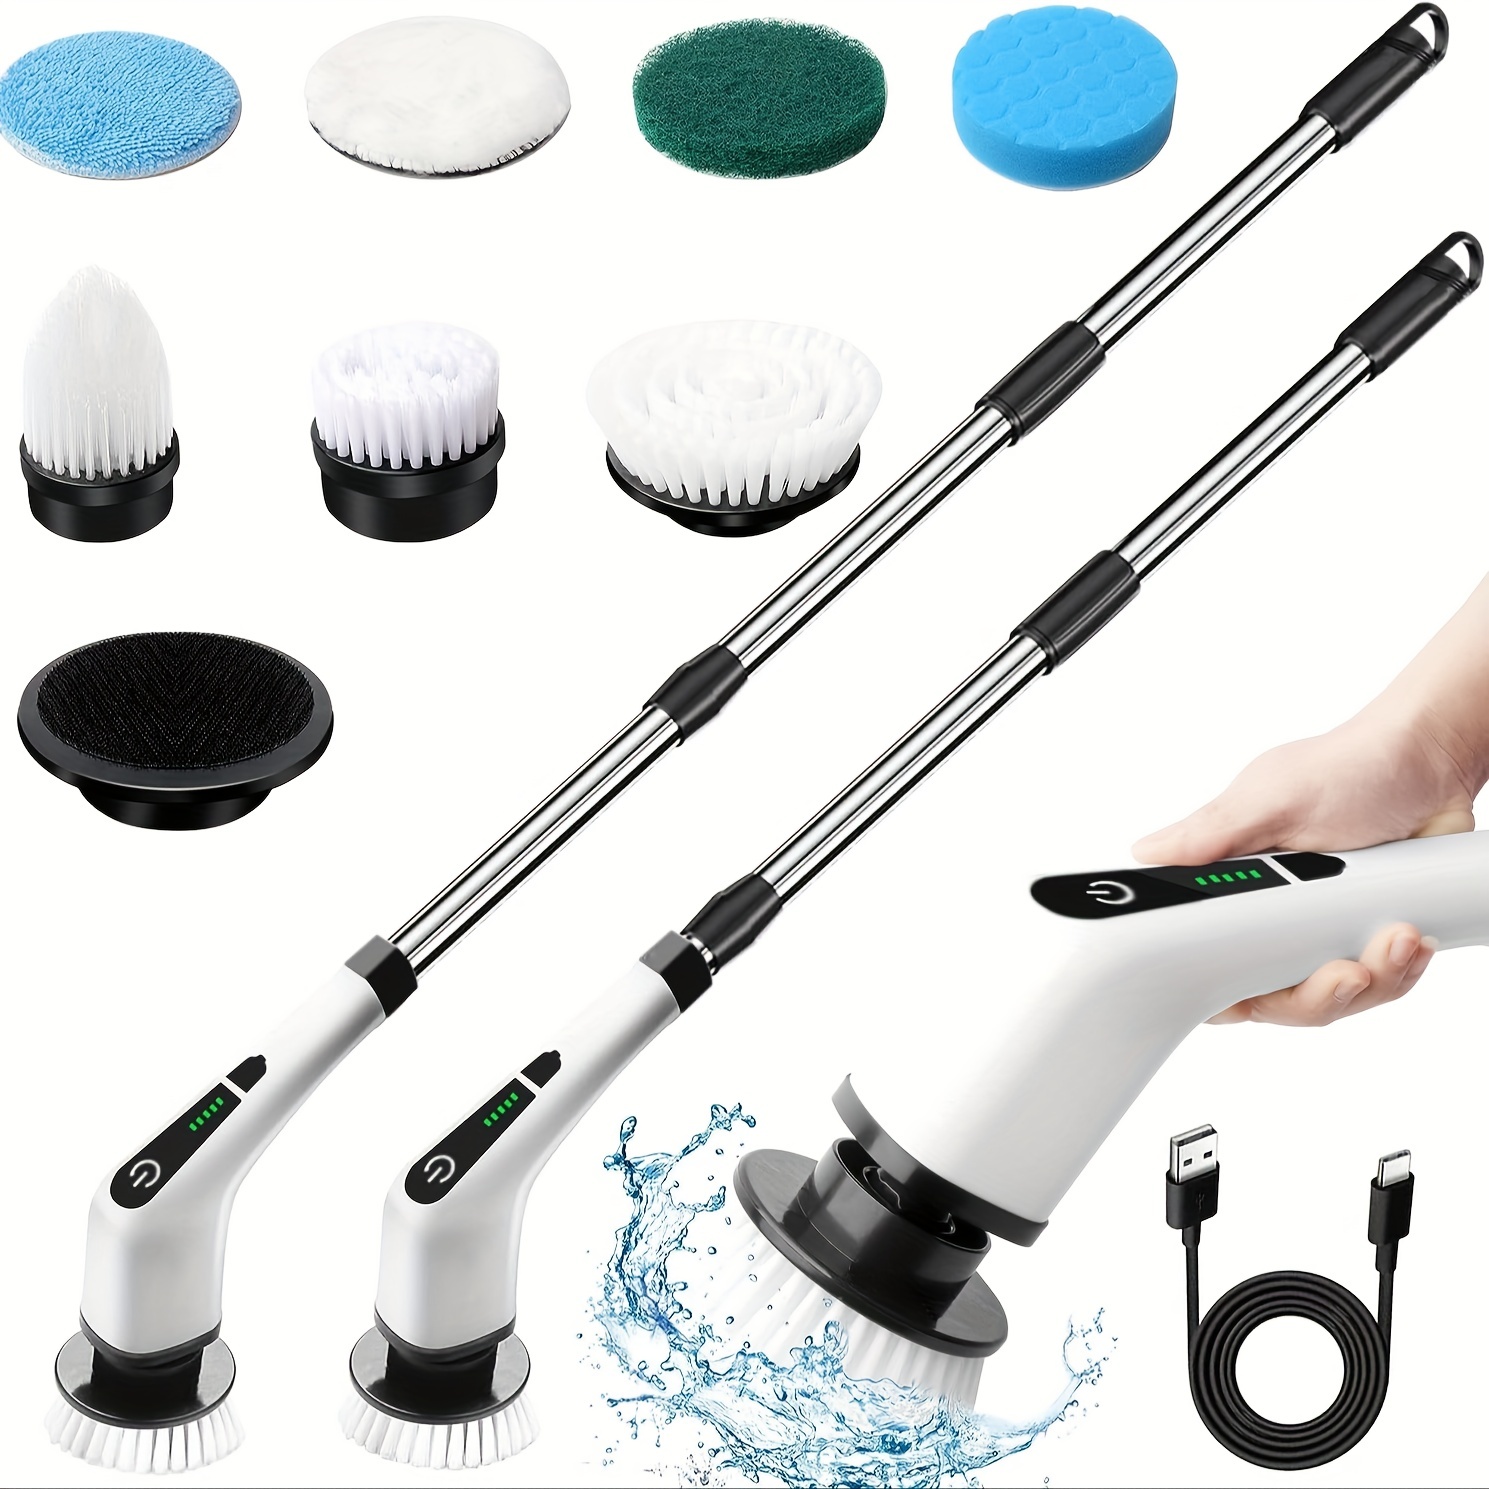 Flexible Cleaning Brush Bendable Scrubber Glass Wall Cleaning Cleaner For  Home Kitchen Bathroom Bathtub Tile Countertop And Floor Cleaning Tool